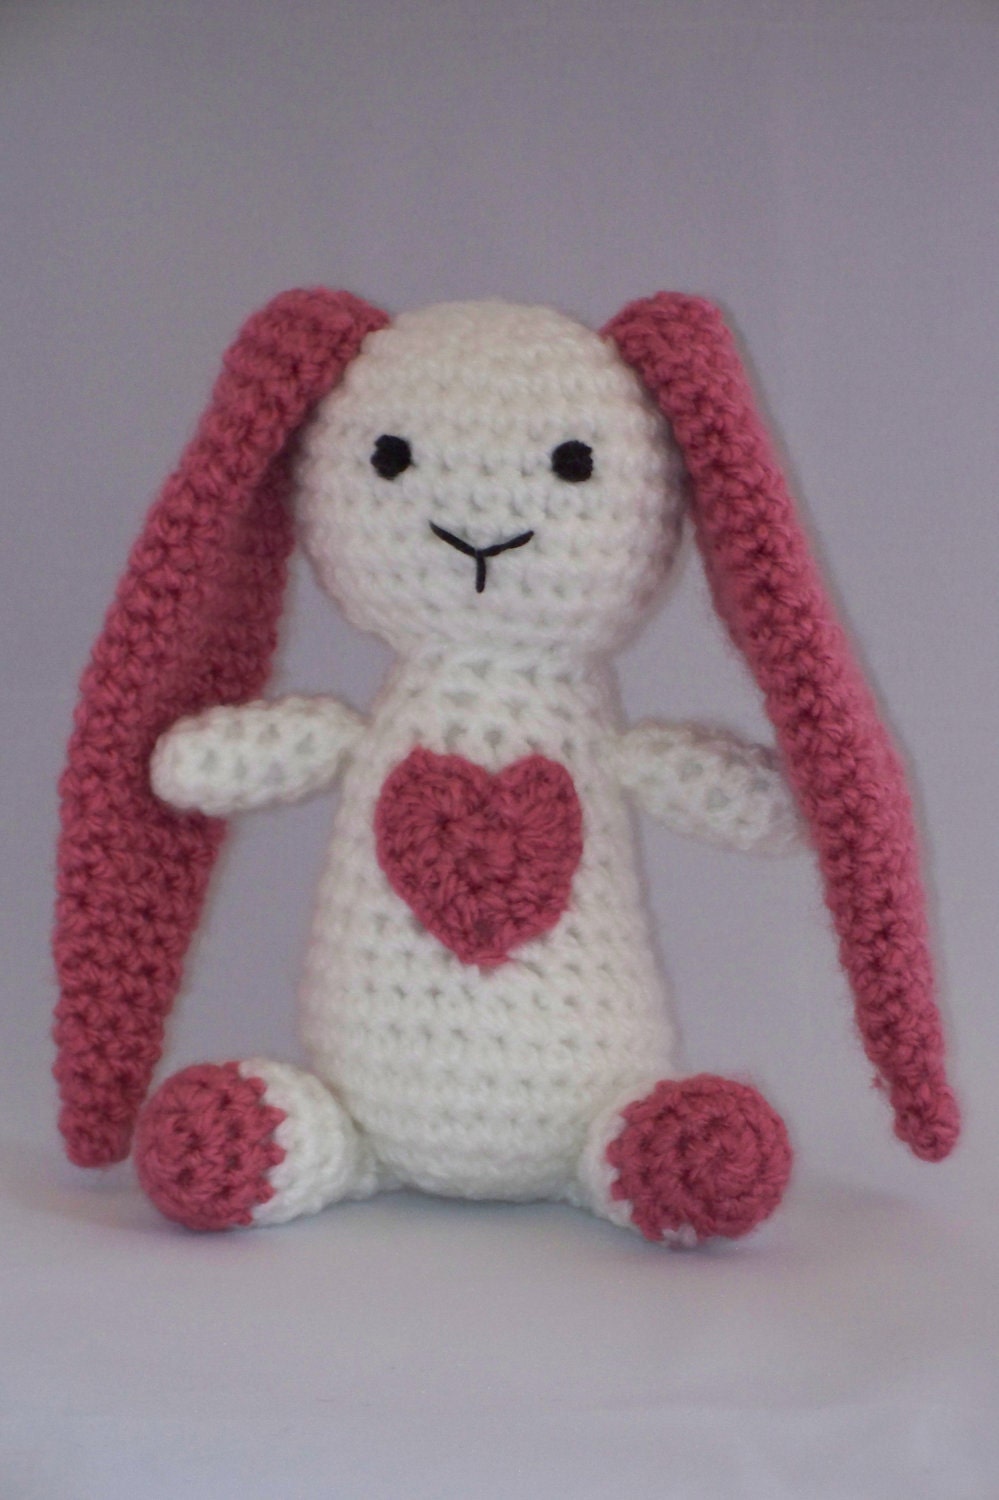 Crochet Bunny with a Big Heart, Stuffed Toy,  Rose Pink and White, Baby, Baby Shower Gift